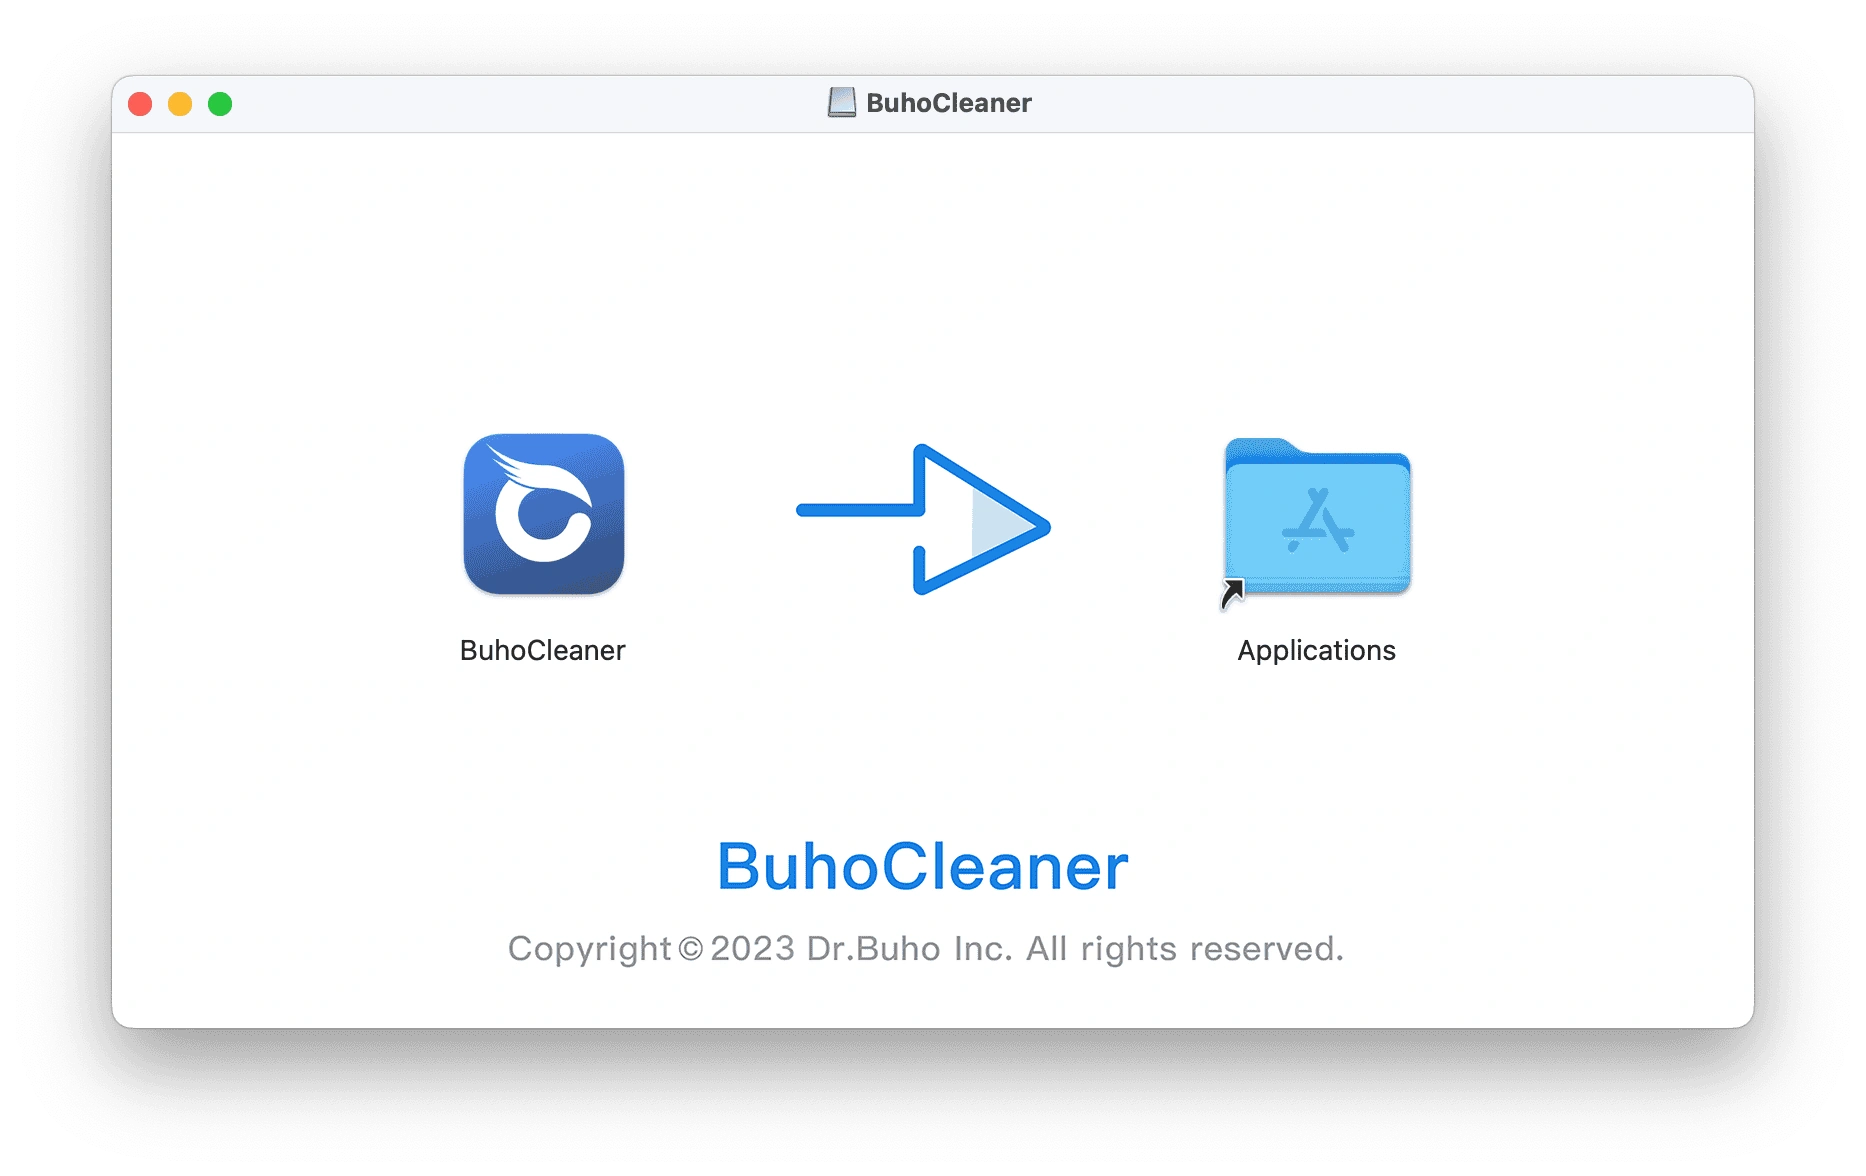 Install BuhoCleaner on Your Mac